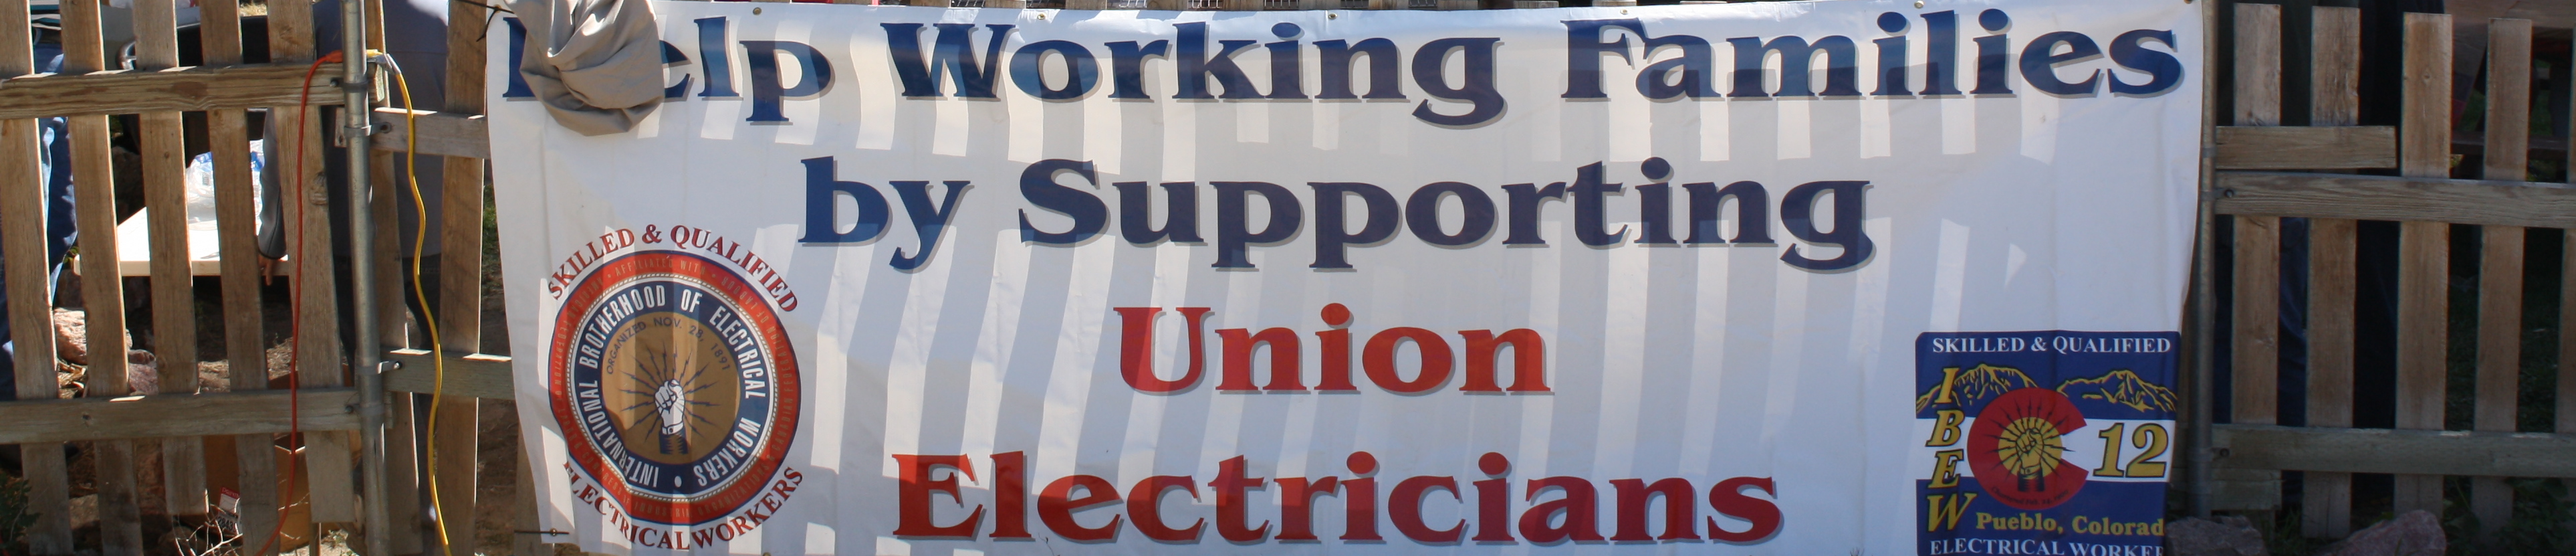 What is the average wage of union electricians?